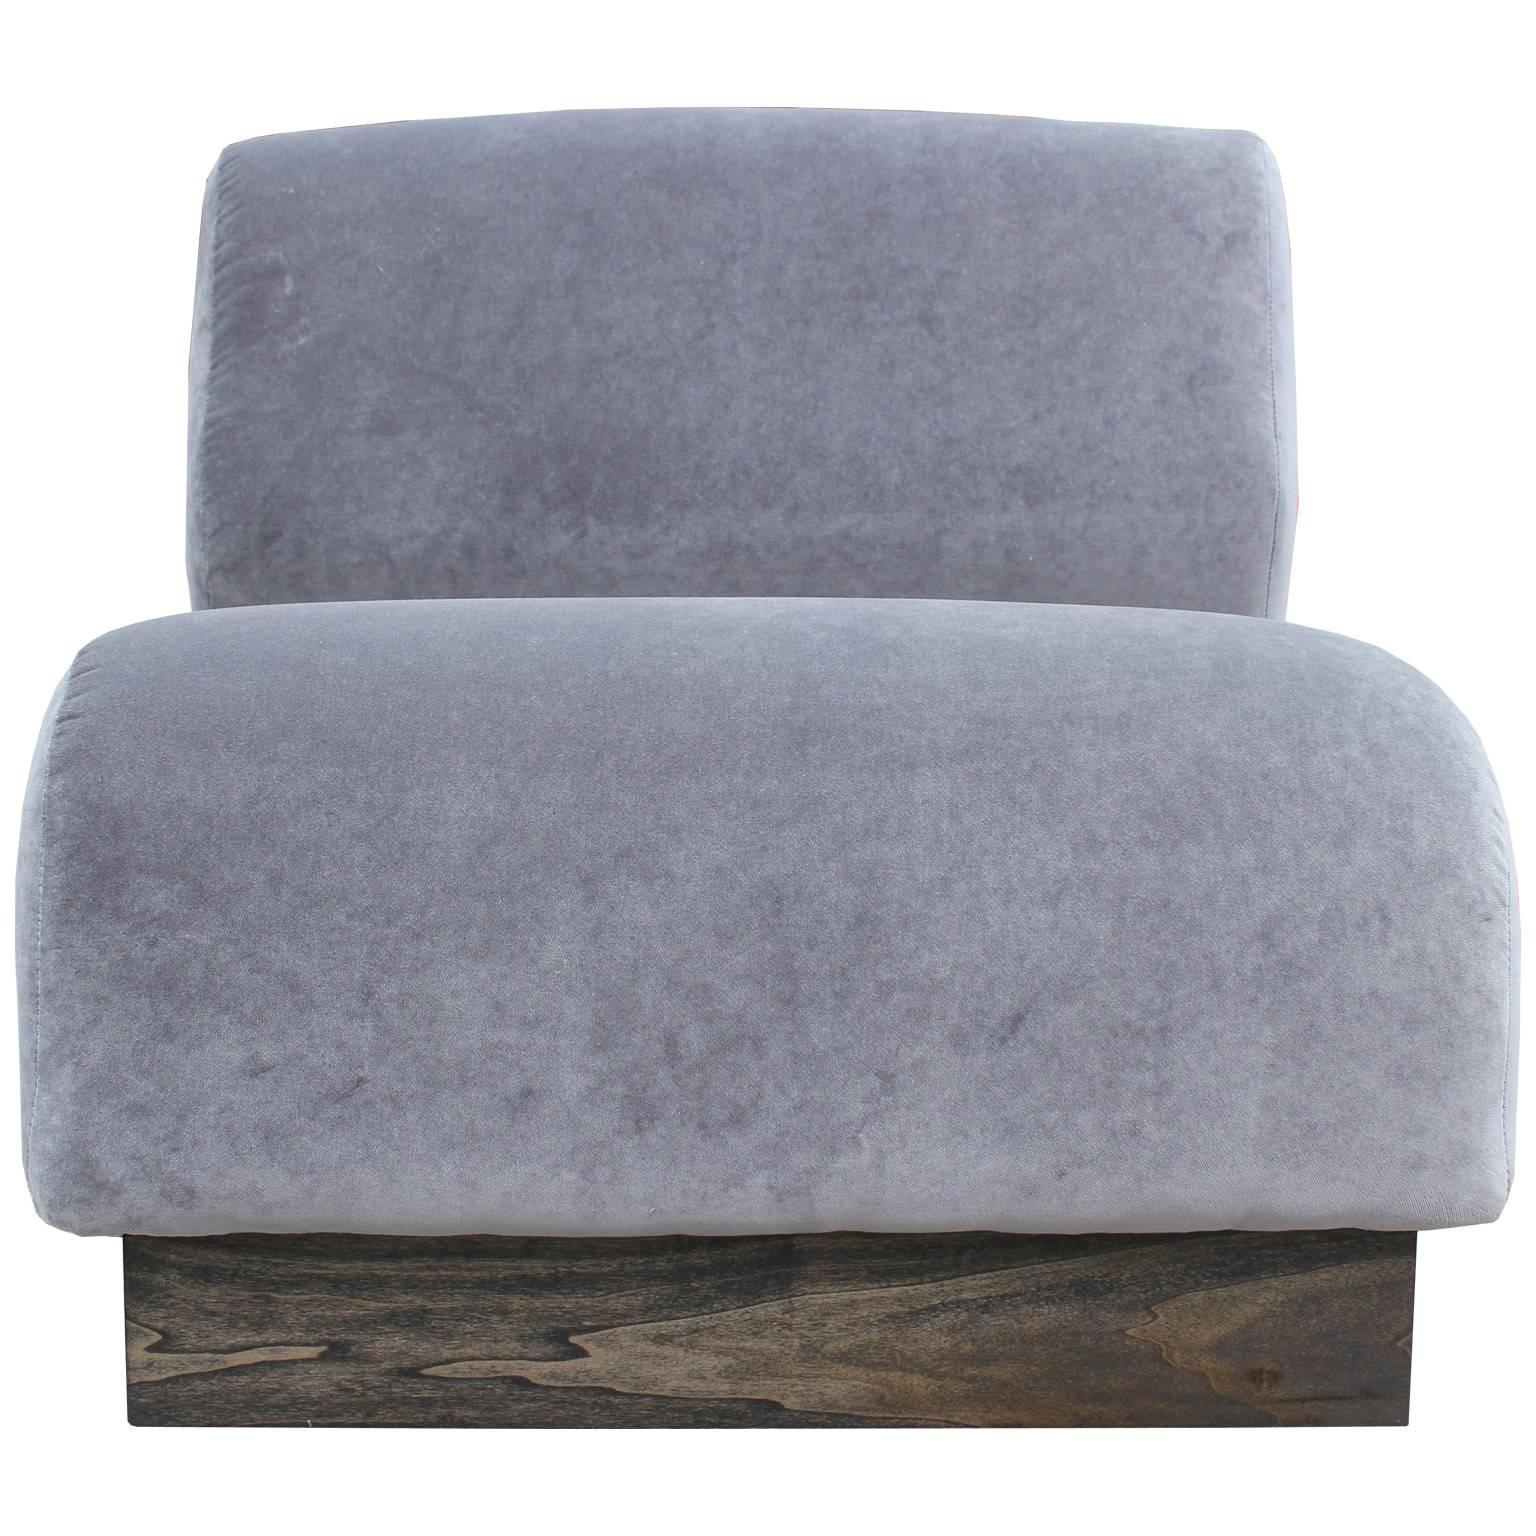 Excellent, modular slipper chair designed by Don Chadwick for Herman Miller. Chair is freshly upholstered in a luxe grey velvet. Charcoal stained custom wooden base.
    